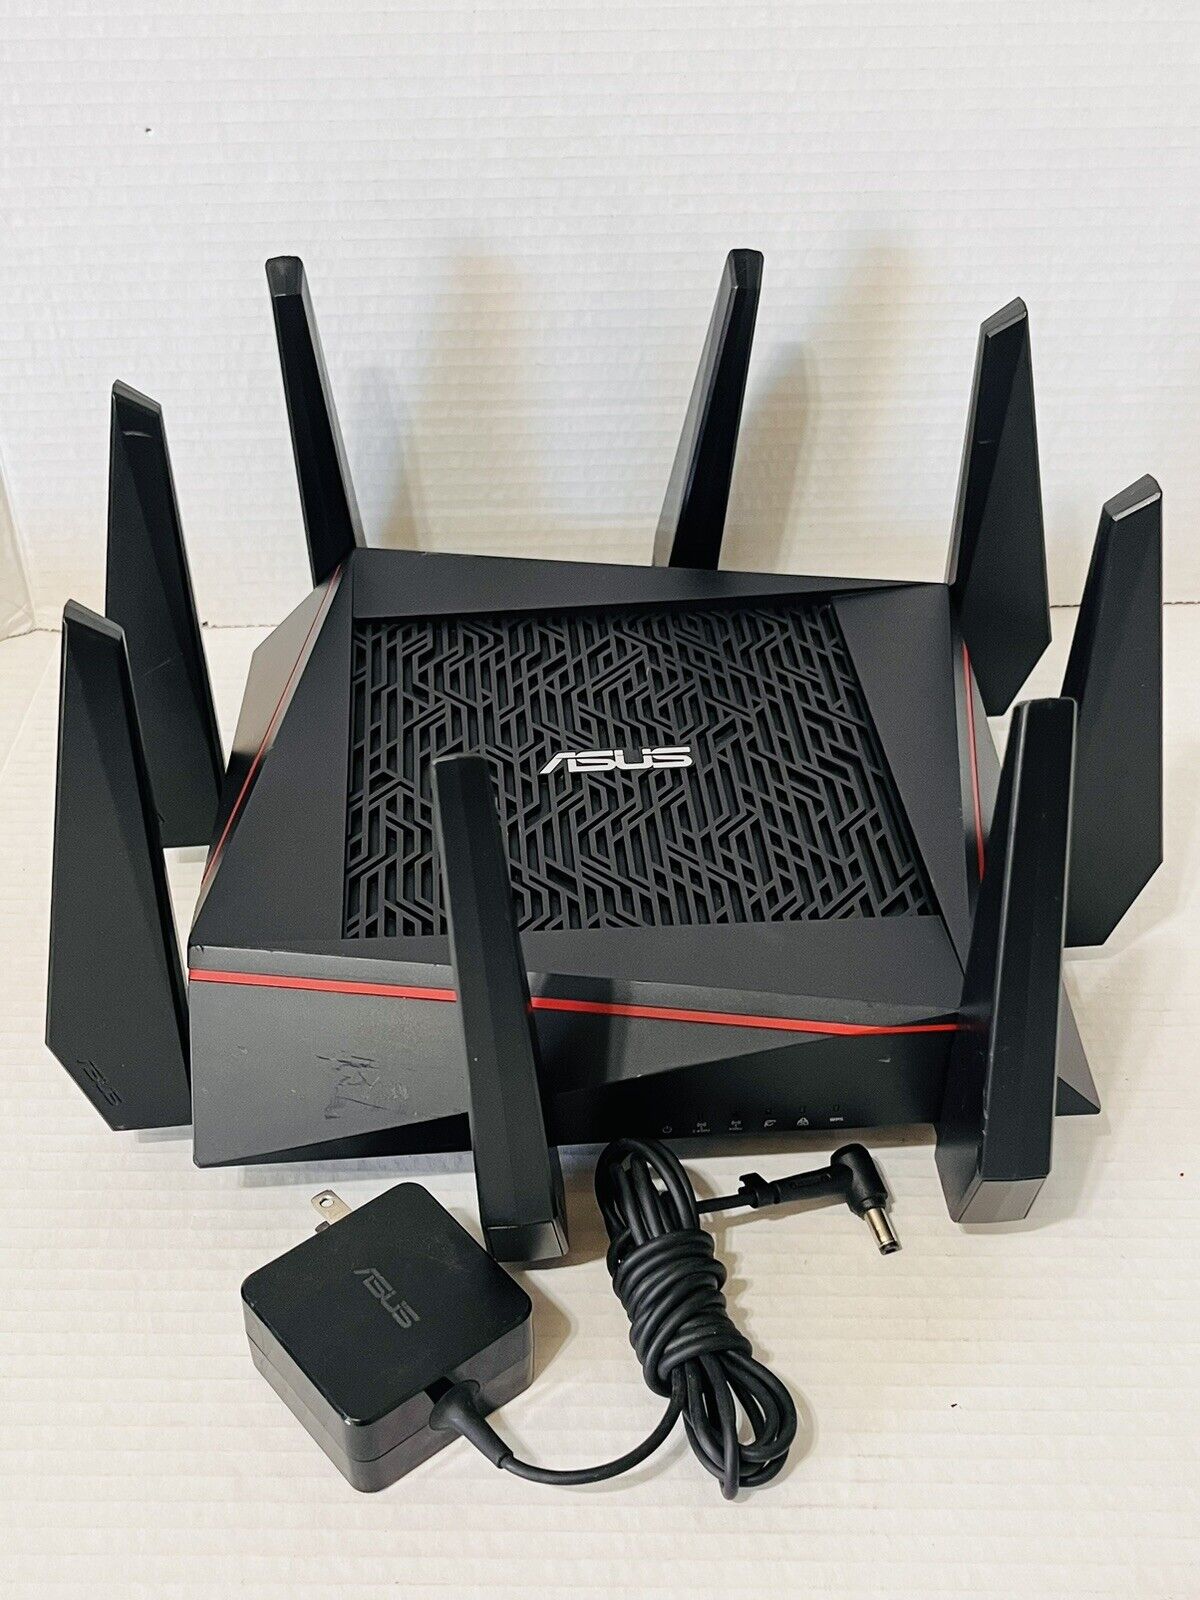 Asus RT-AC5300 Wireless Tri-Band Gigabit Router - TURNS ON BUT UNTESTED - AS-IS